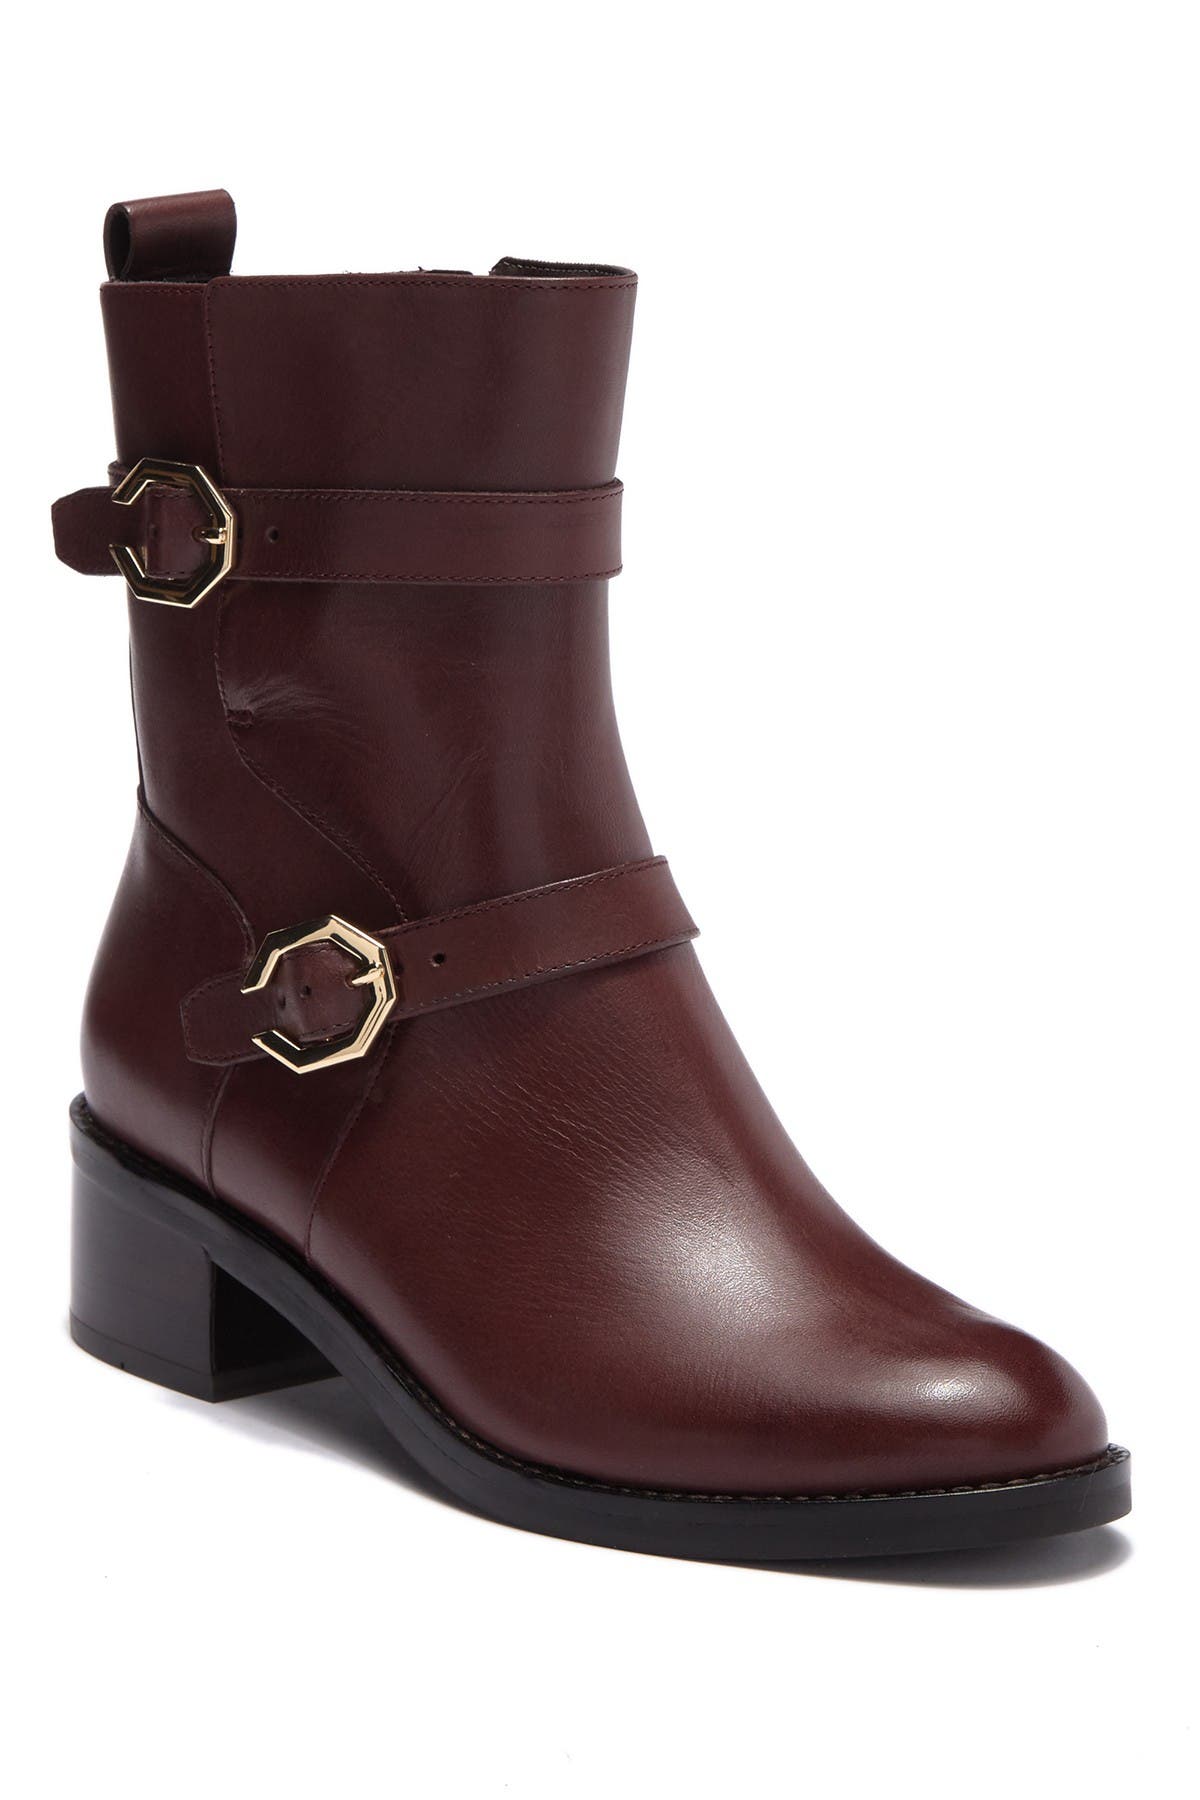 cole haan leela grand 36 riding boots